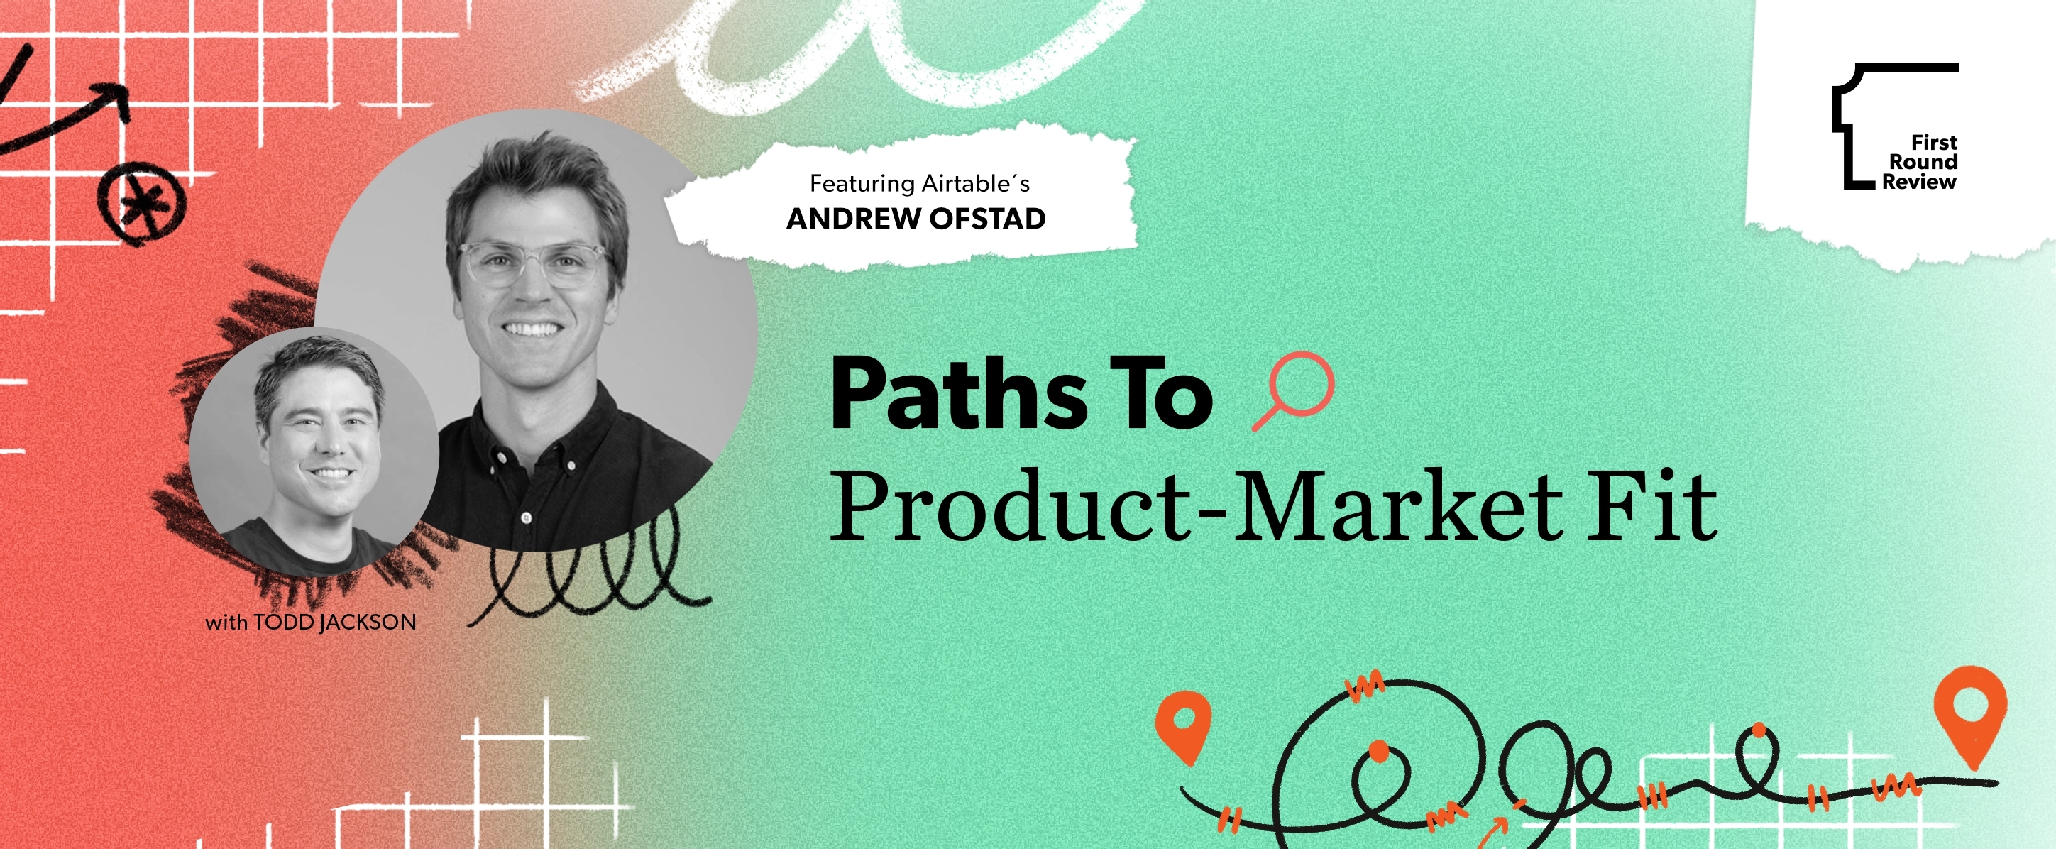 Art for Paths to Product Market Fit Series - green and red background, featuring graph and squiggly line elements (representing the long, winding journey), along with photos of Todd Jackson and Andrew Ofstad